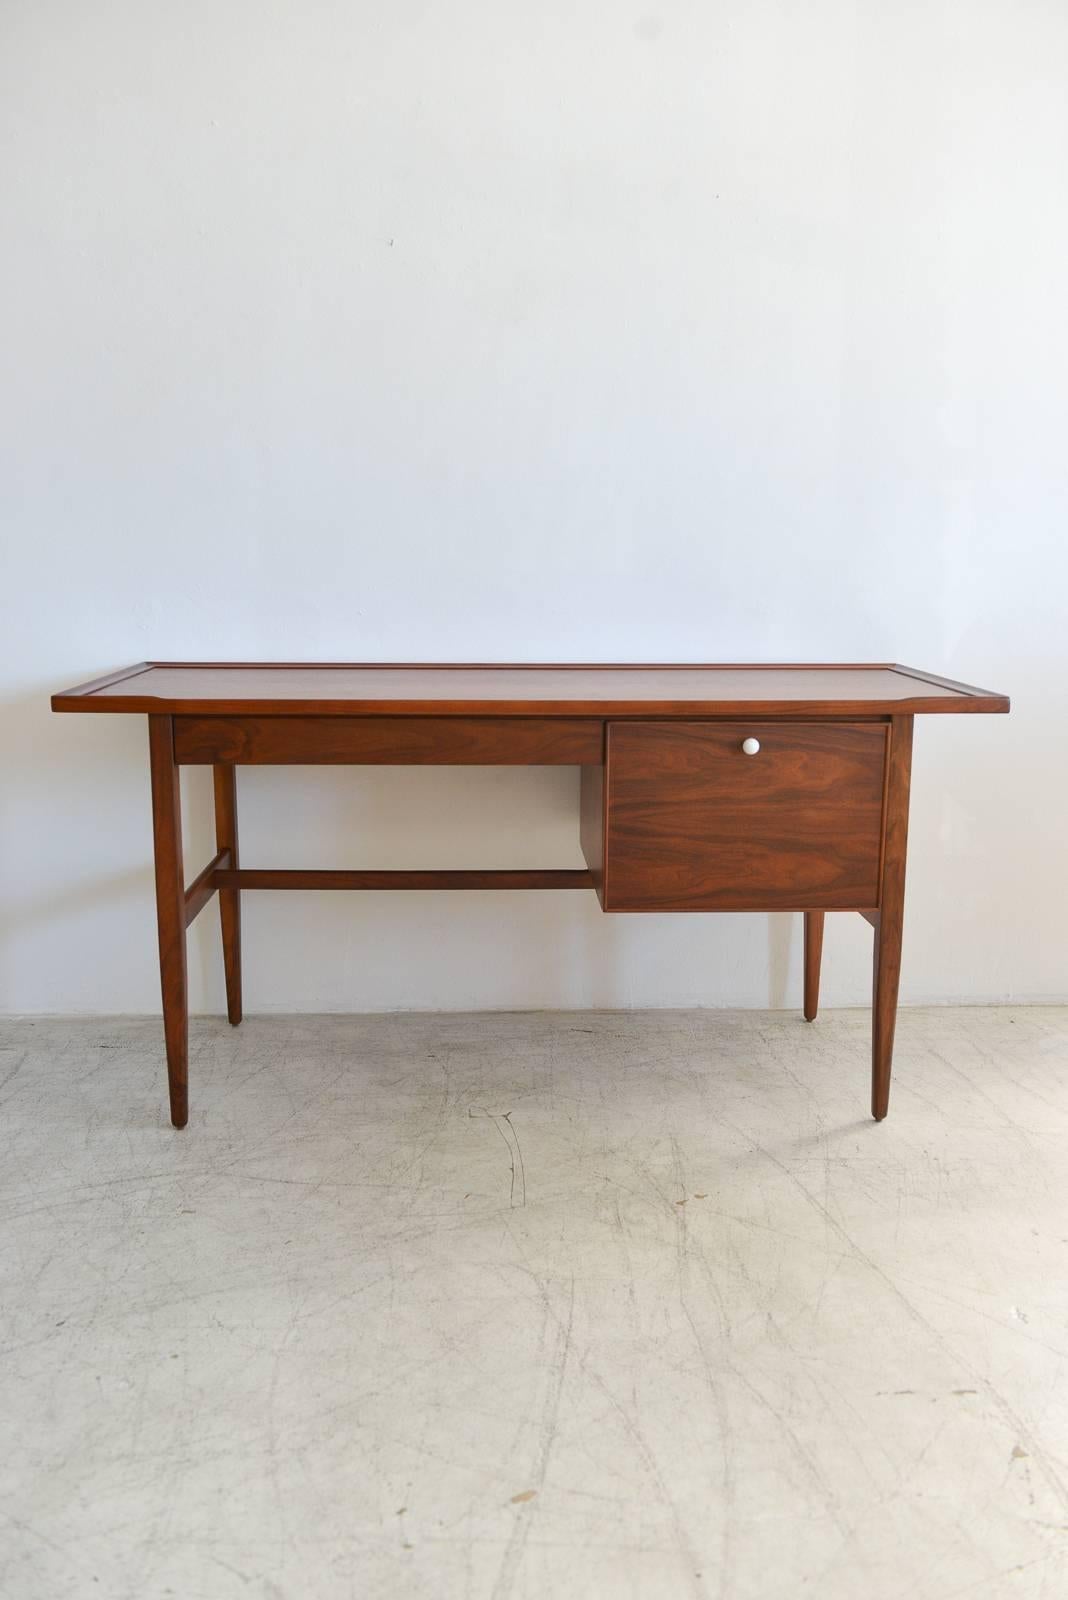 Beautiful walnut desk by Kipp Stewart for Drexel Declaration. Original porcelain hardware and sliding interior drawer (rarely do you find these). Refinished to showroom perfect condition ready for your home office or guest room.

Measures 60